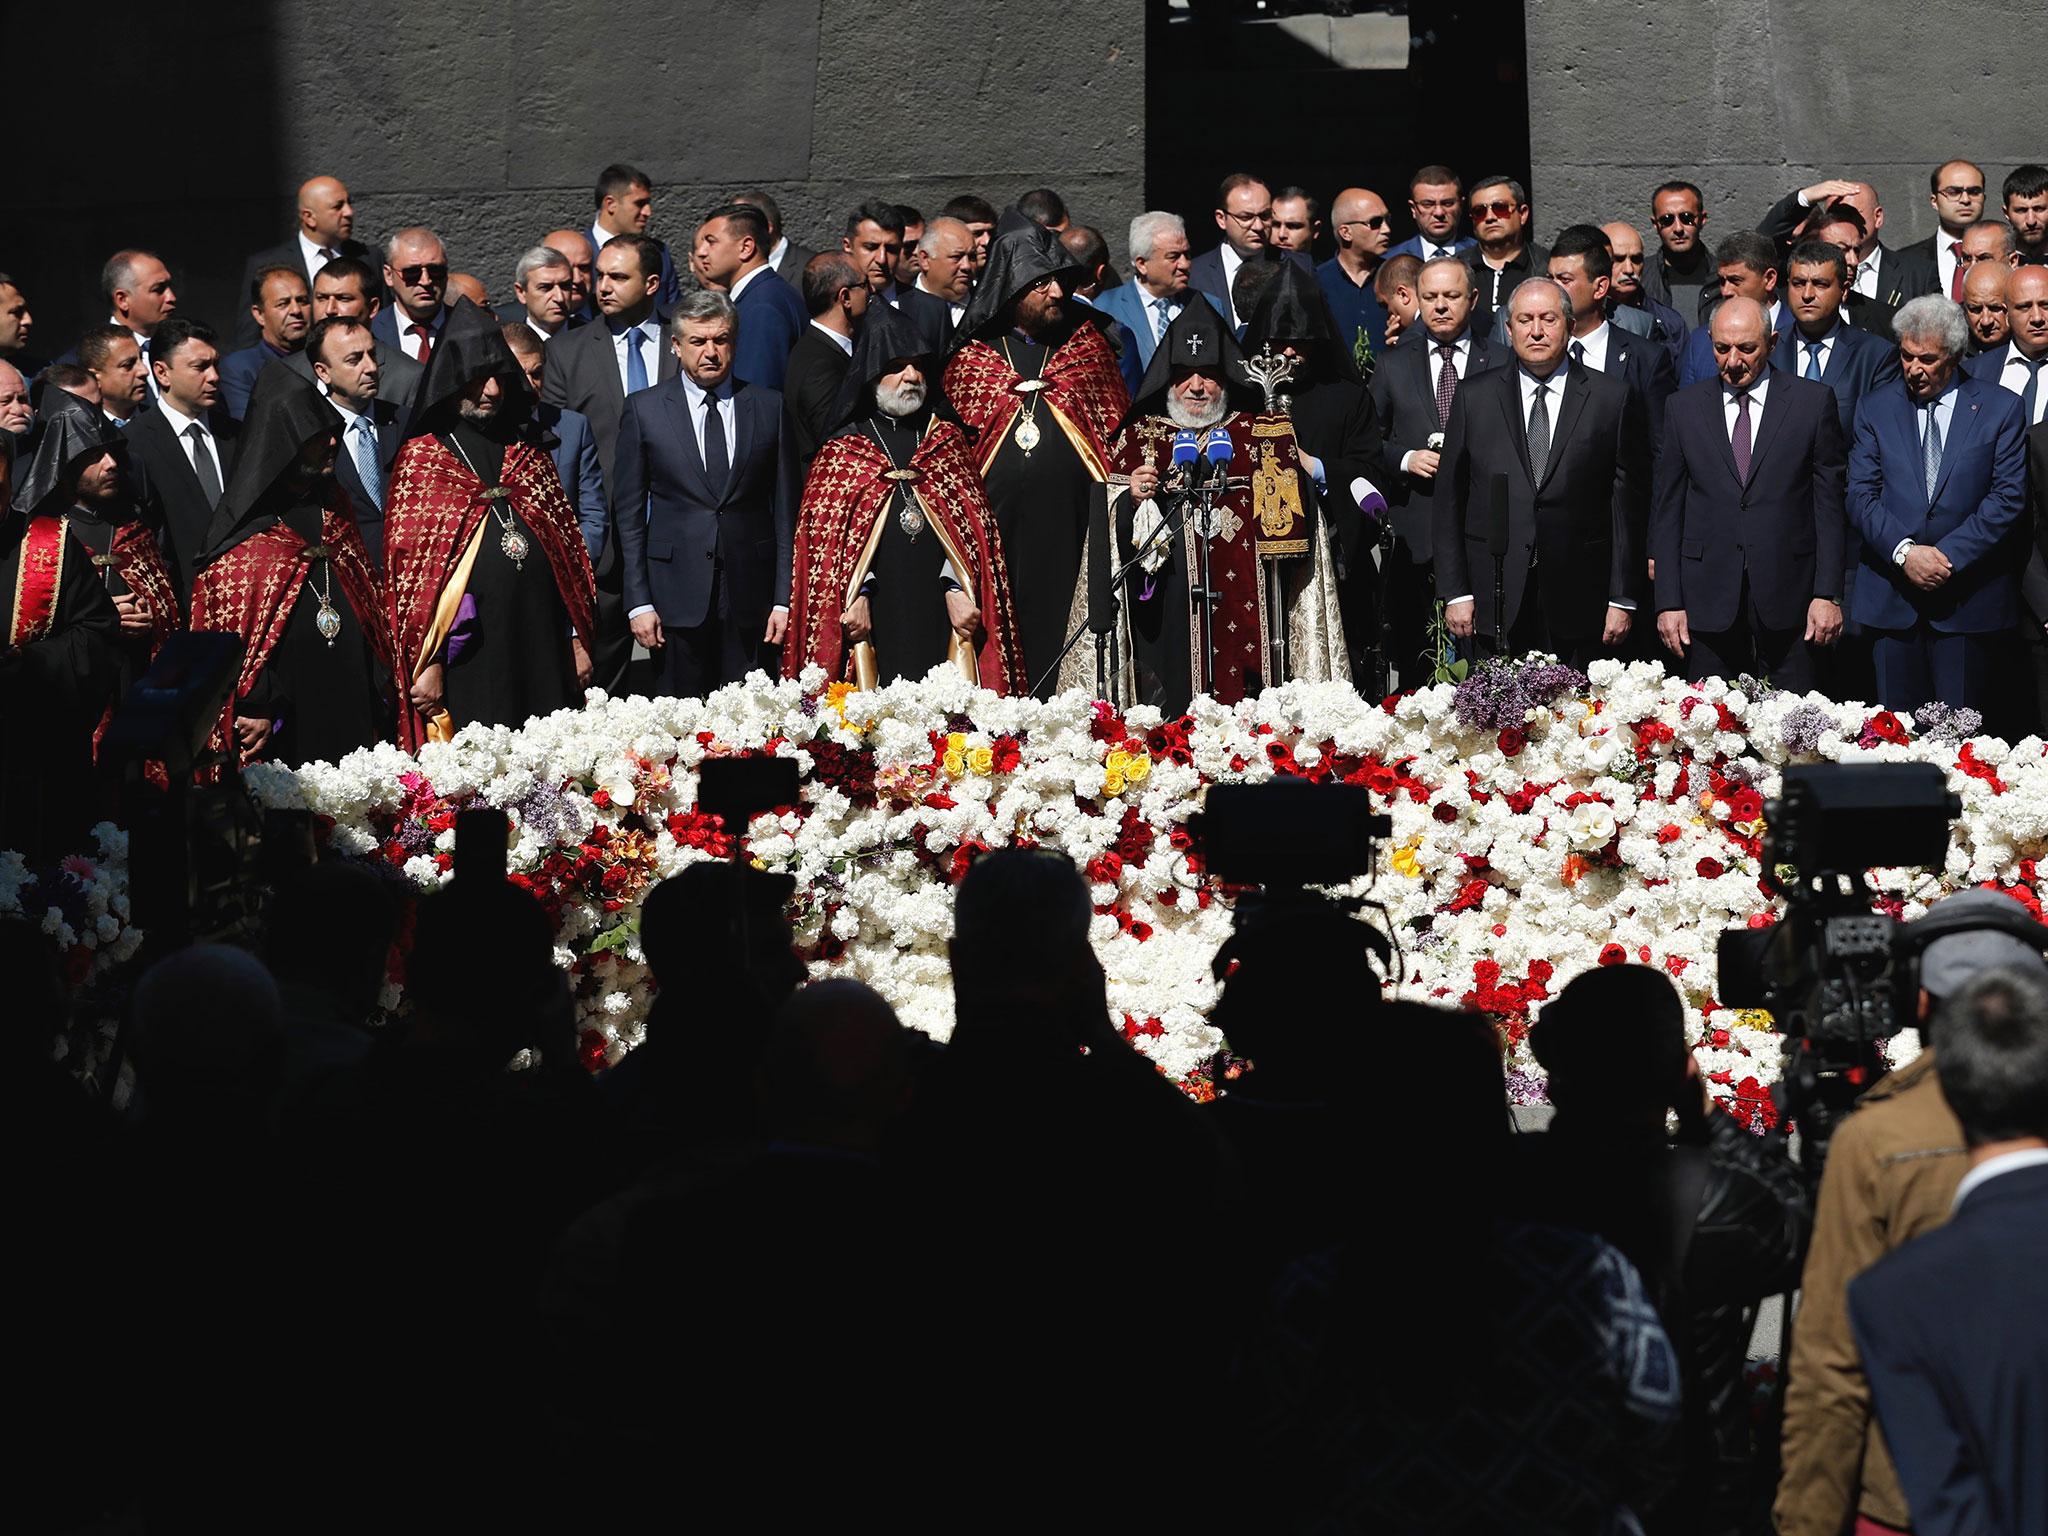 Armenian officials lay flowers at the monument to the victims of mass killings by Ottoman Turks